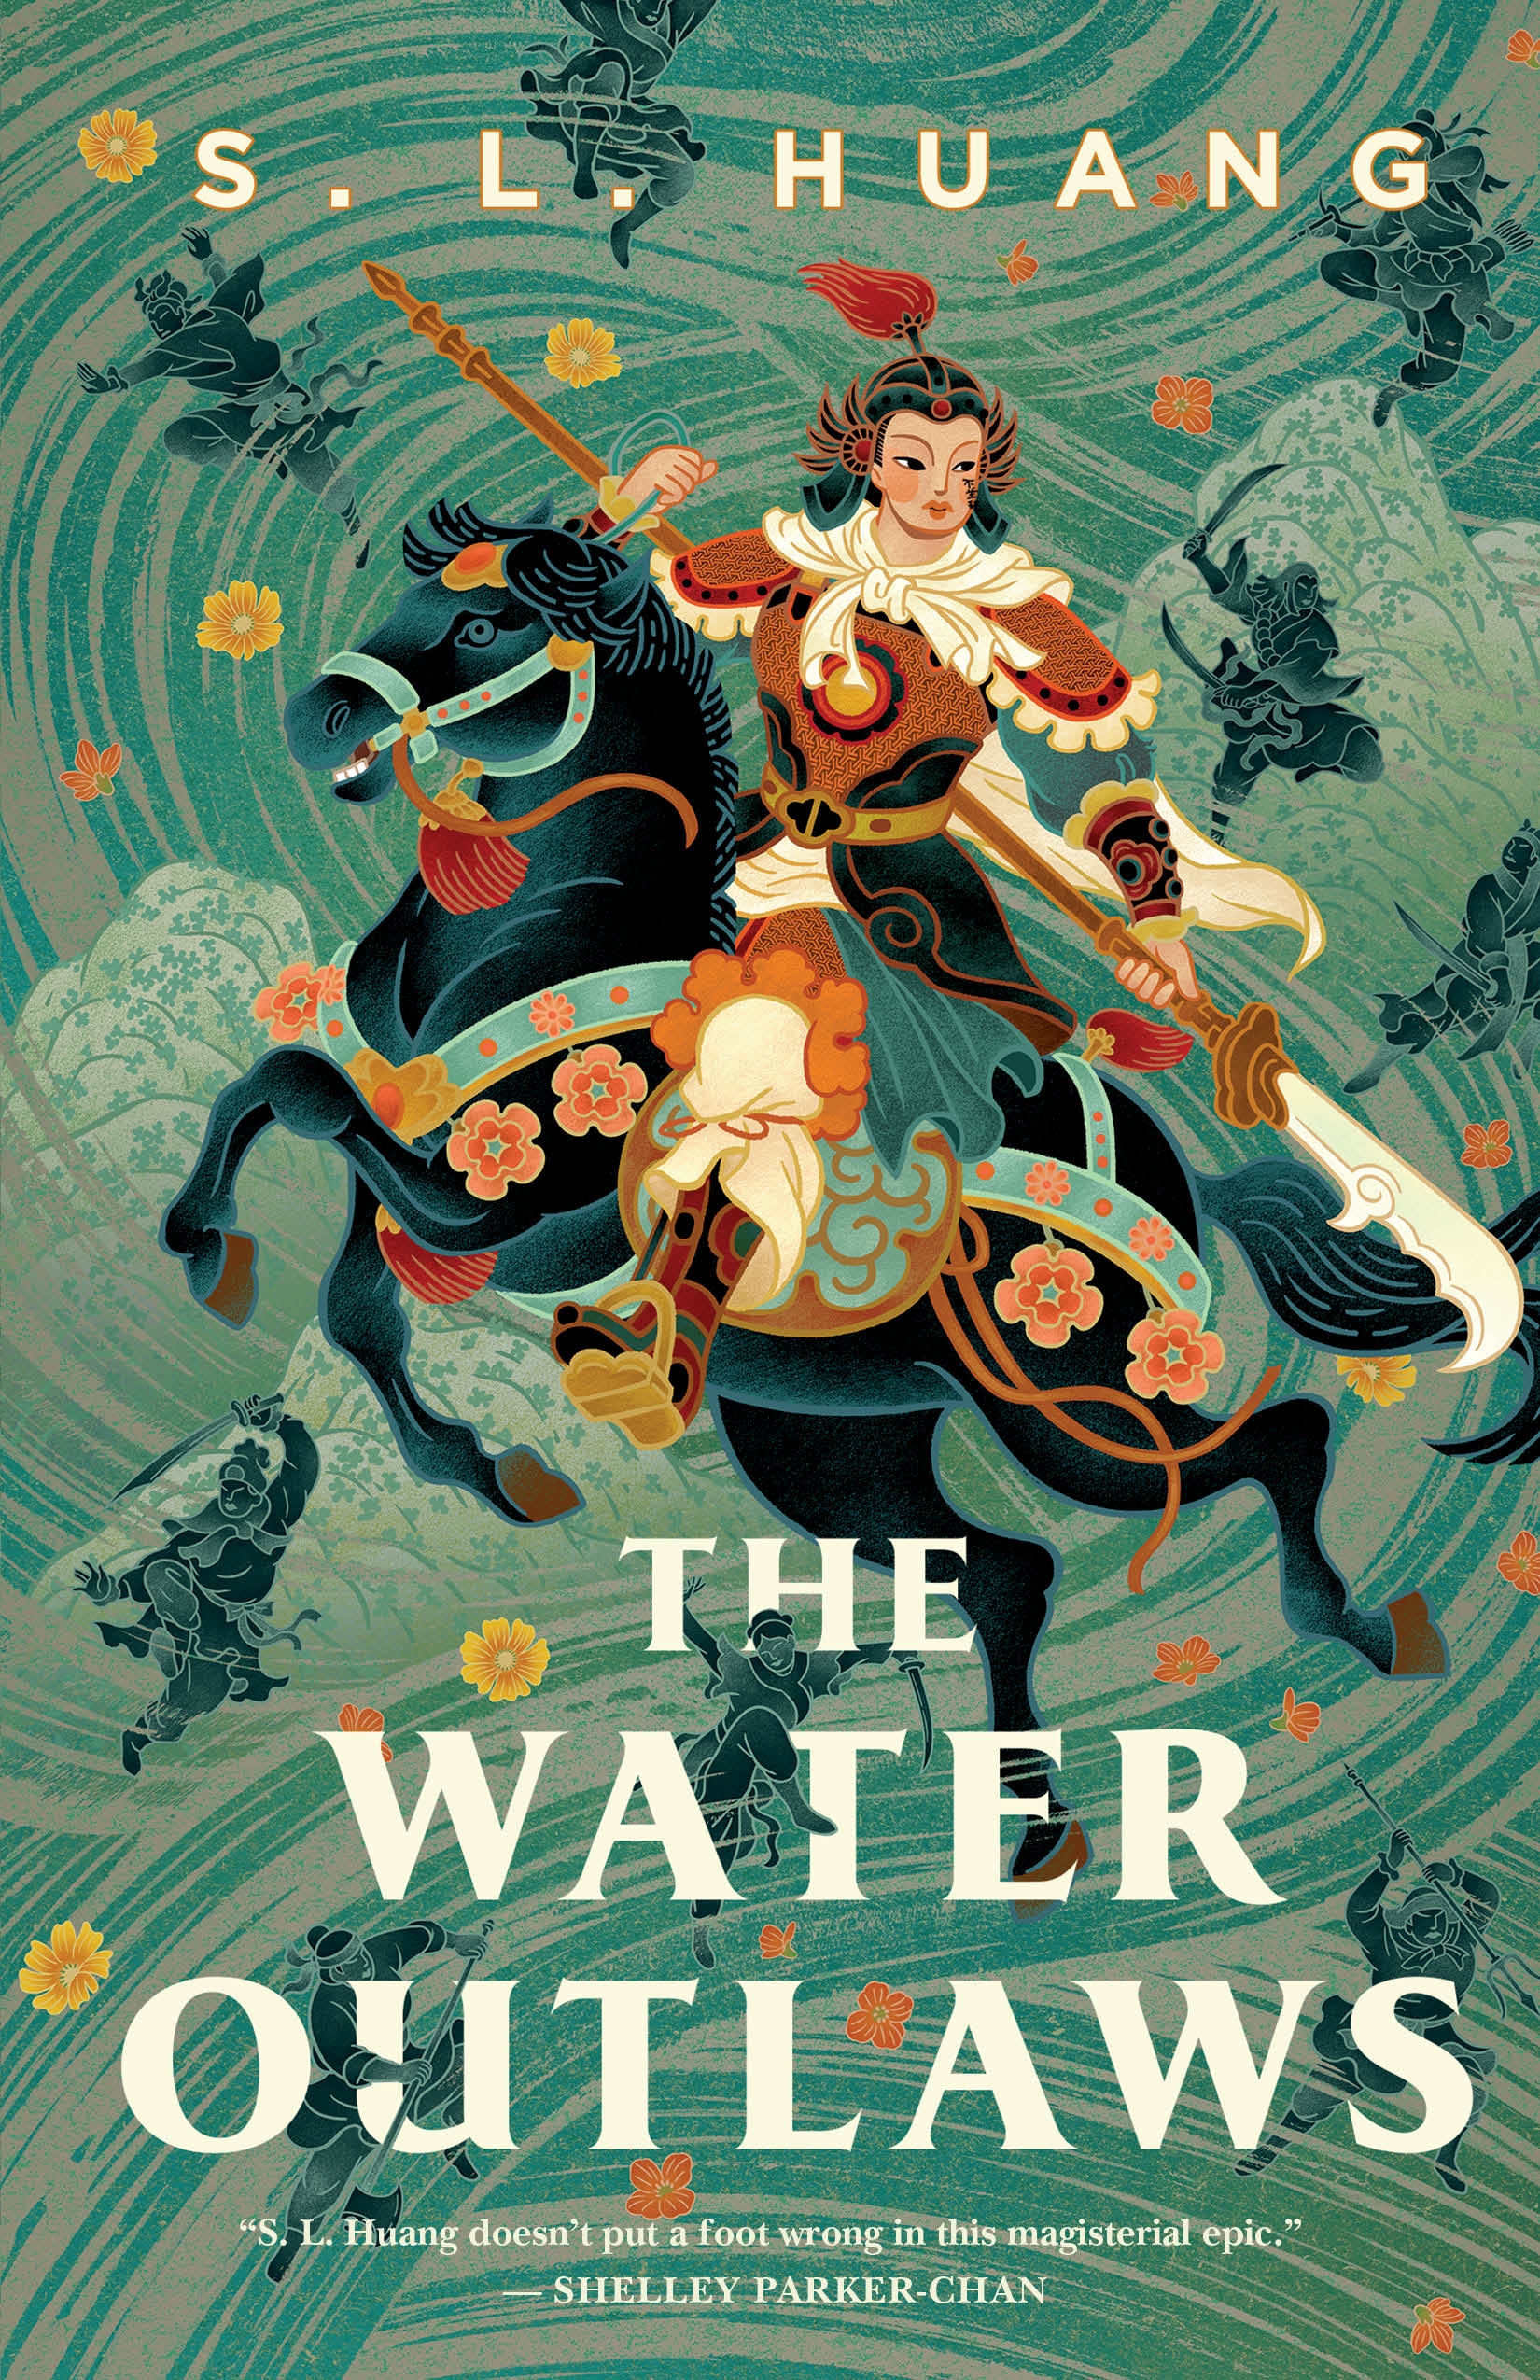 The Water Outlaws by S. L. Huang